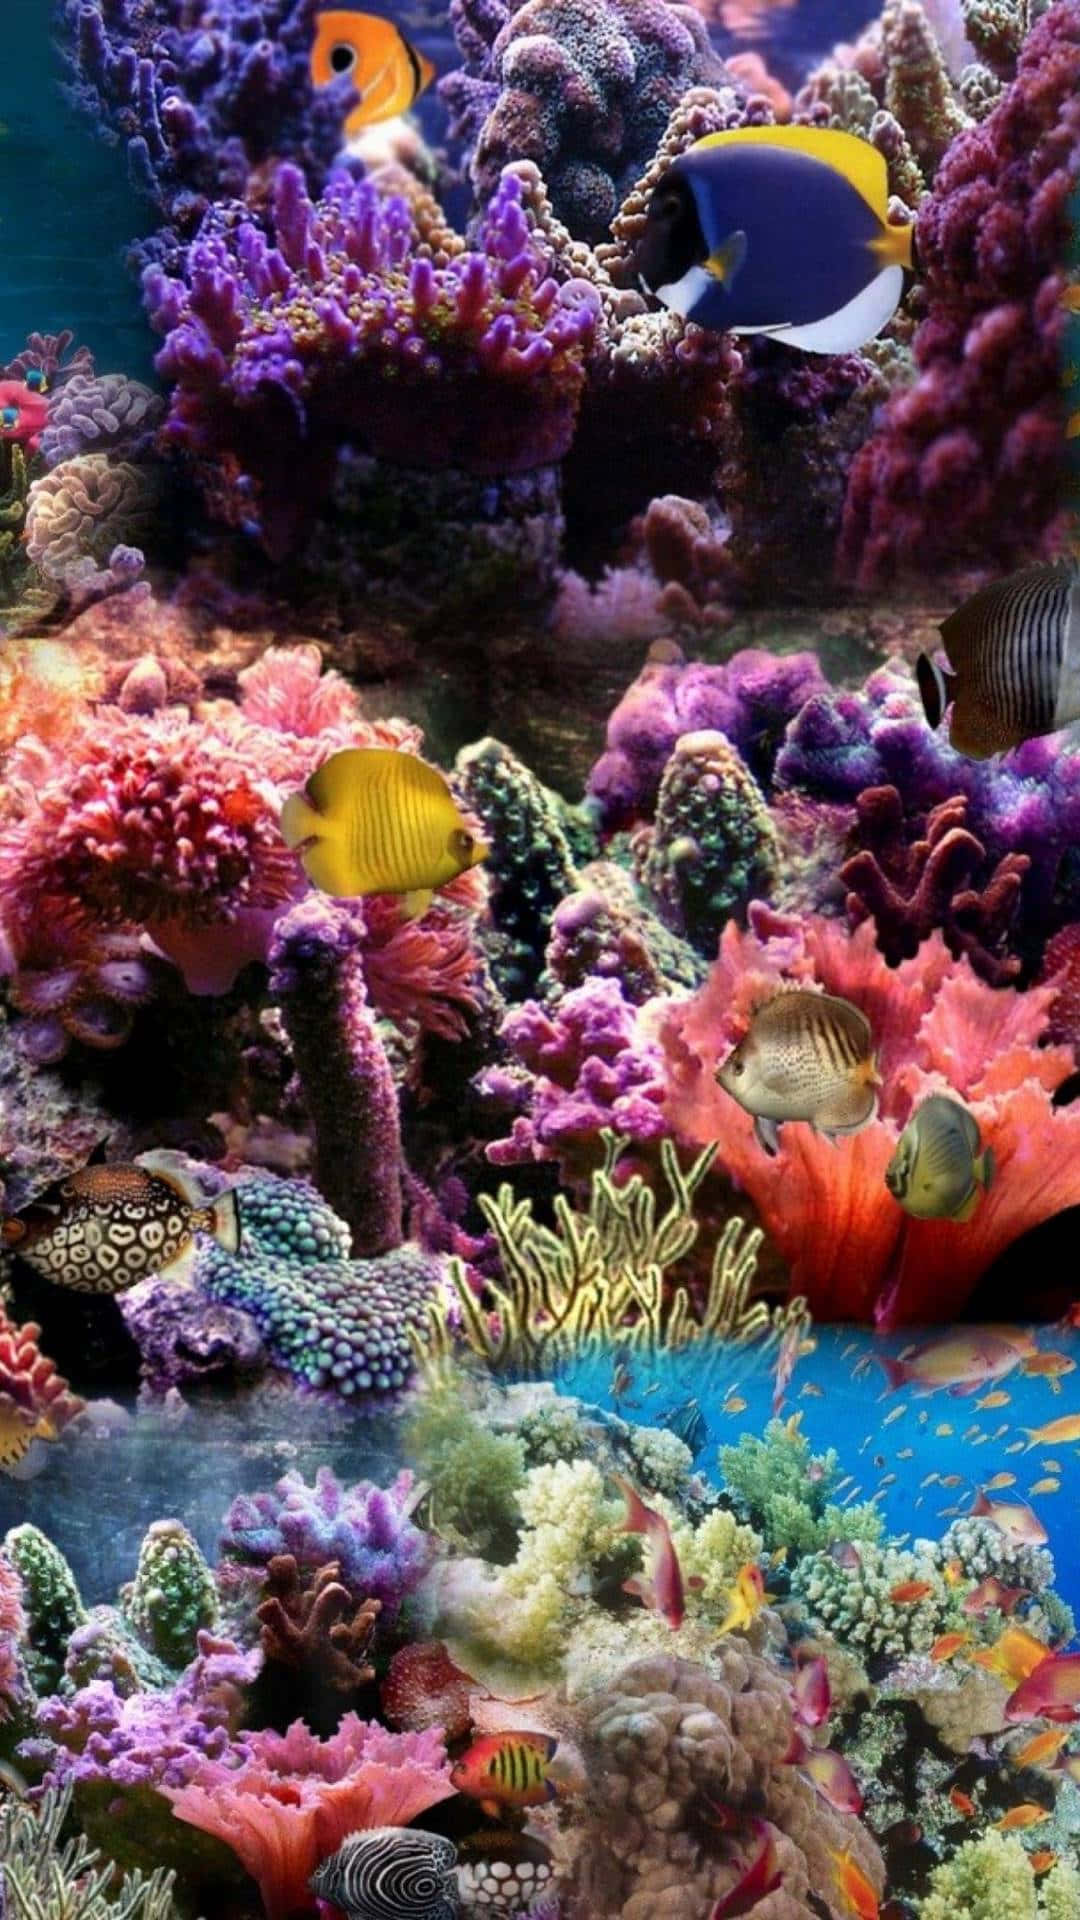 Dive into a World of Wonders with Your Aquarium iPhone Wallpaper